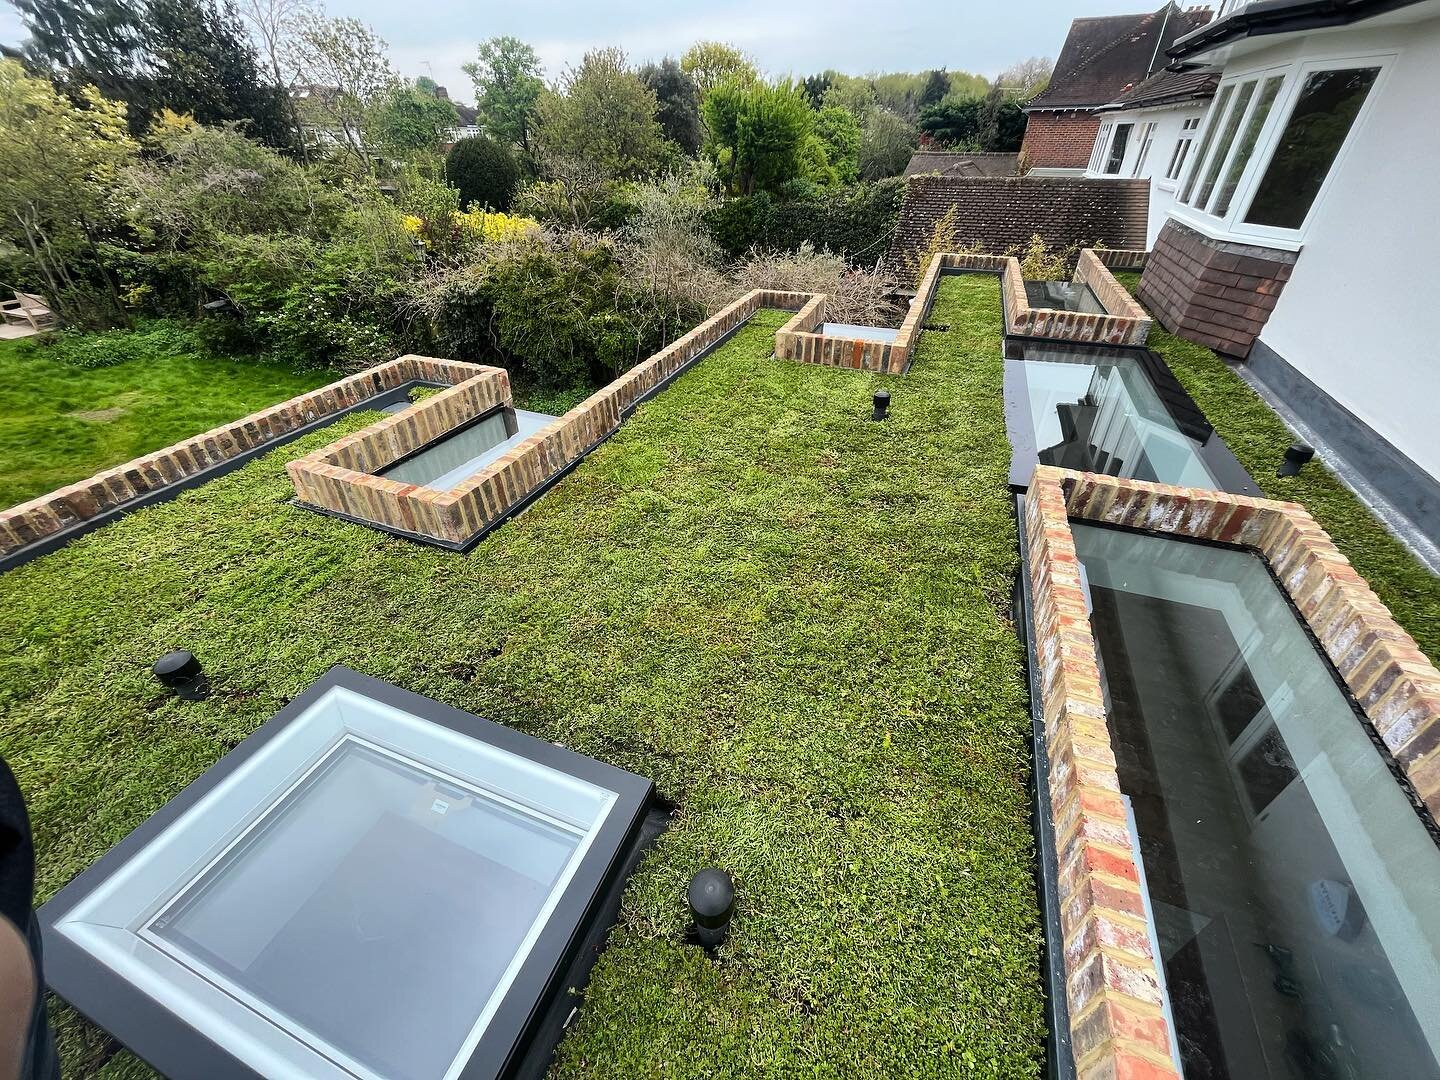 Green roof nearly completed st the Richmond project #greenroof #green #roof #bigbeanconstruction #building #modern #architecture #london